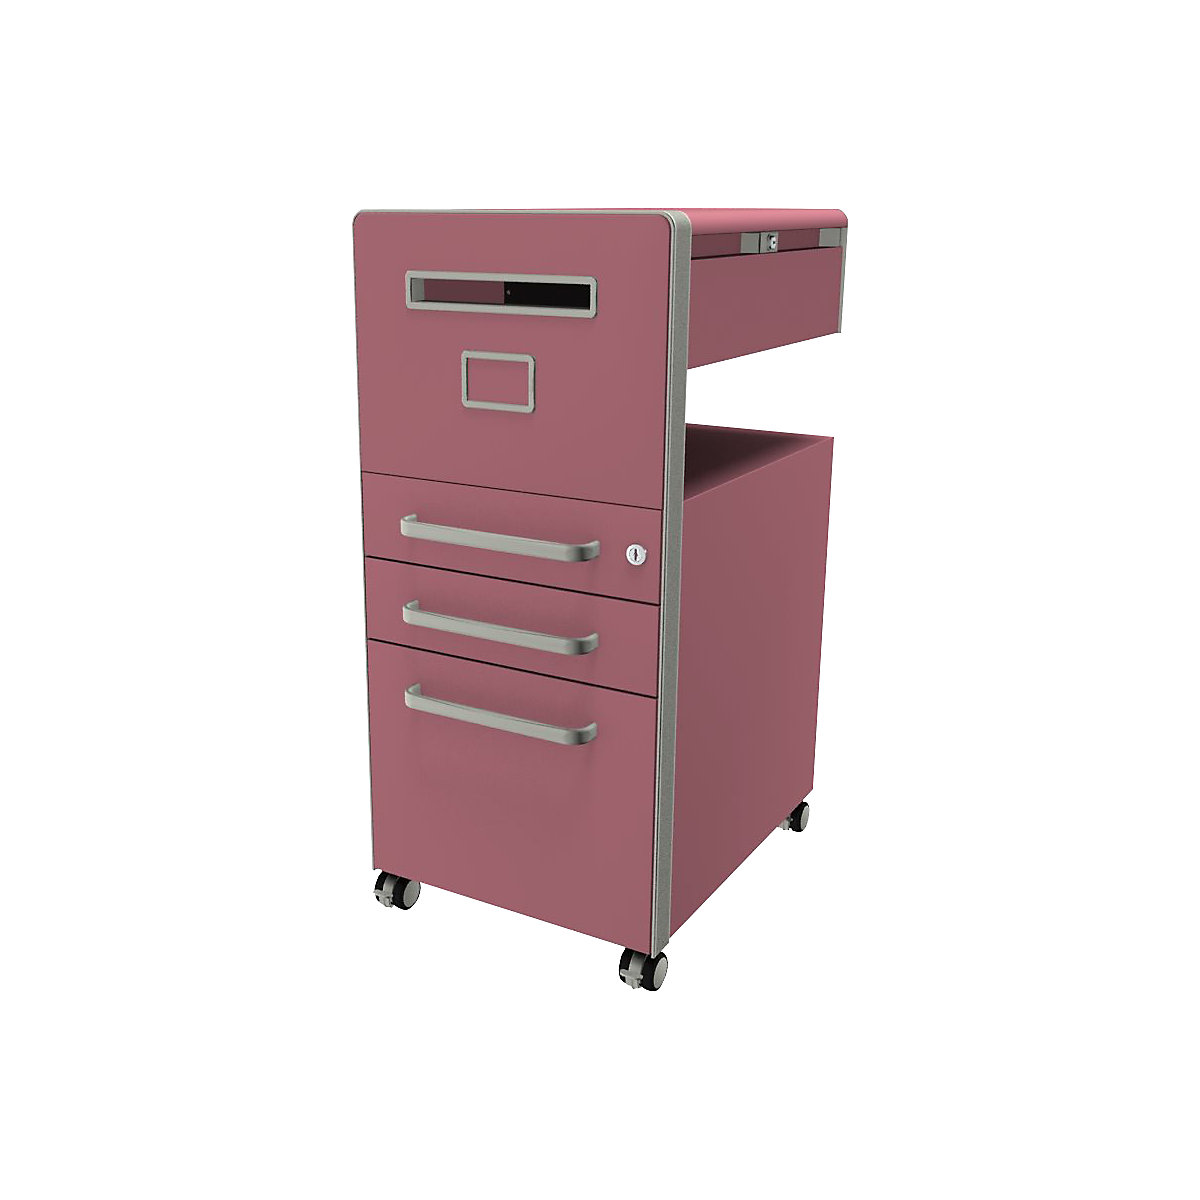 Bite™ pedestal furniture, with 1 pin board, opens on the left side – BISLEY